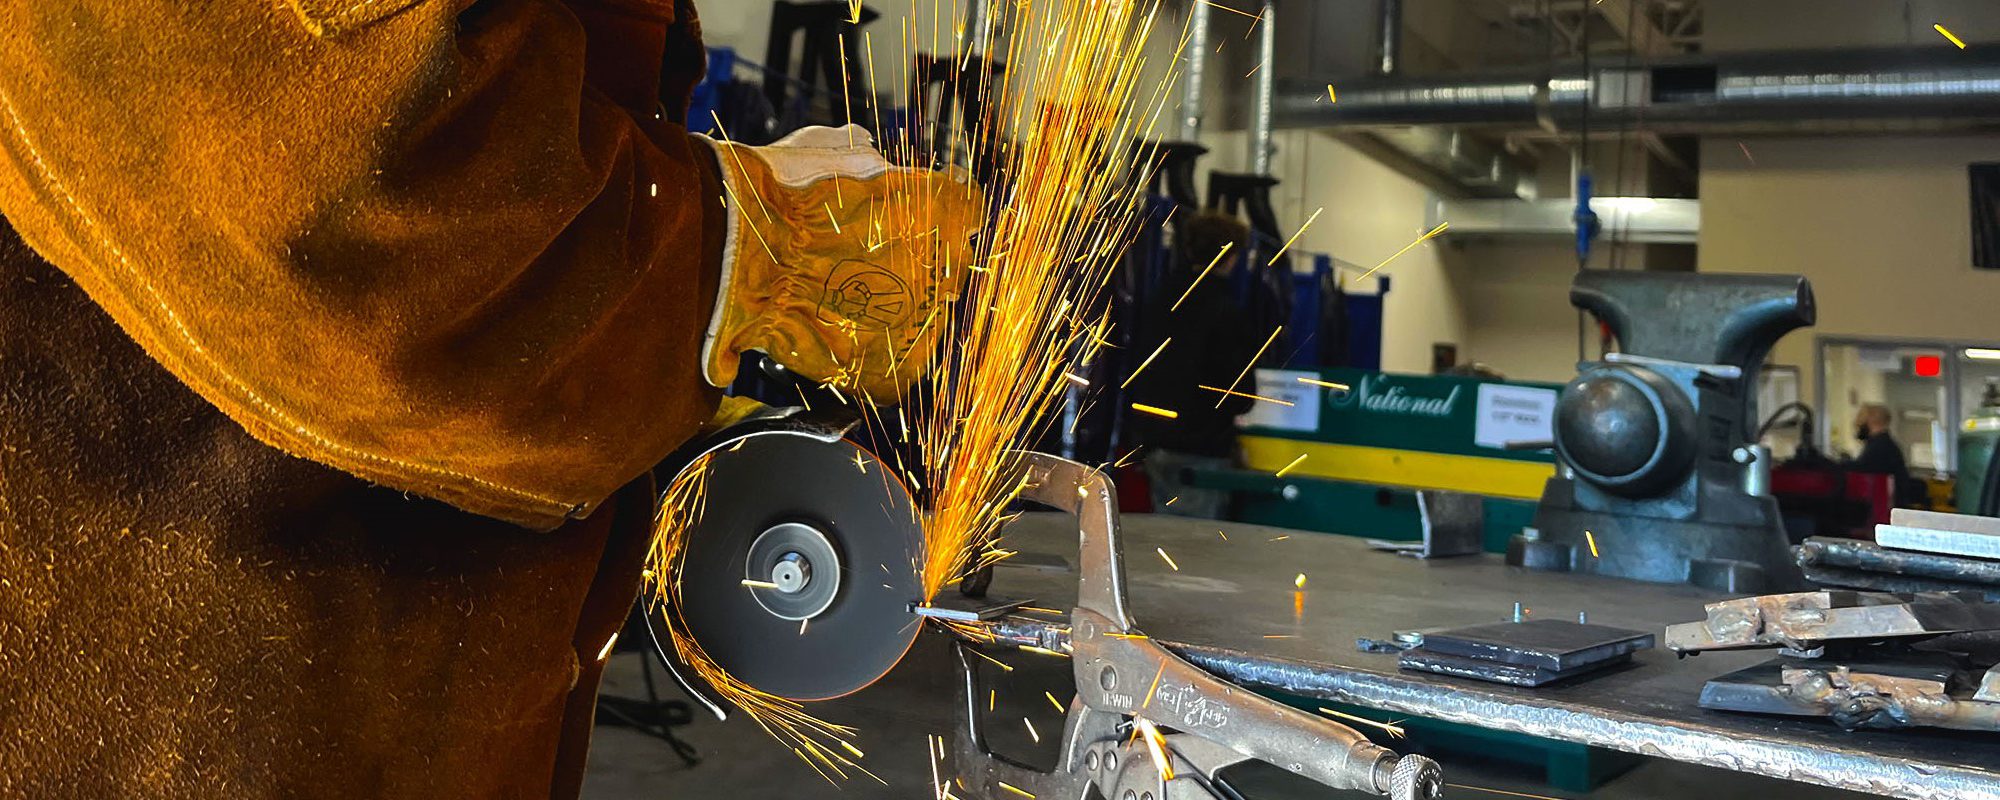 A welder's gloved hands are showered by yellow and orange sparks in the midst of a project.